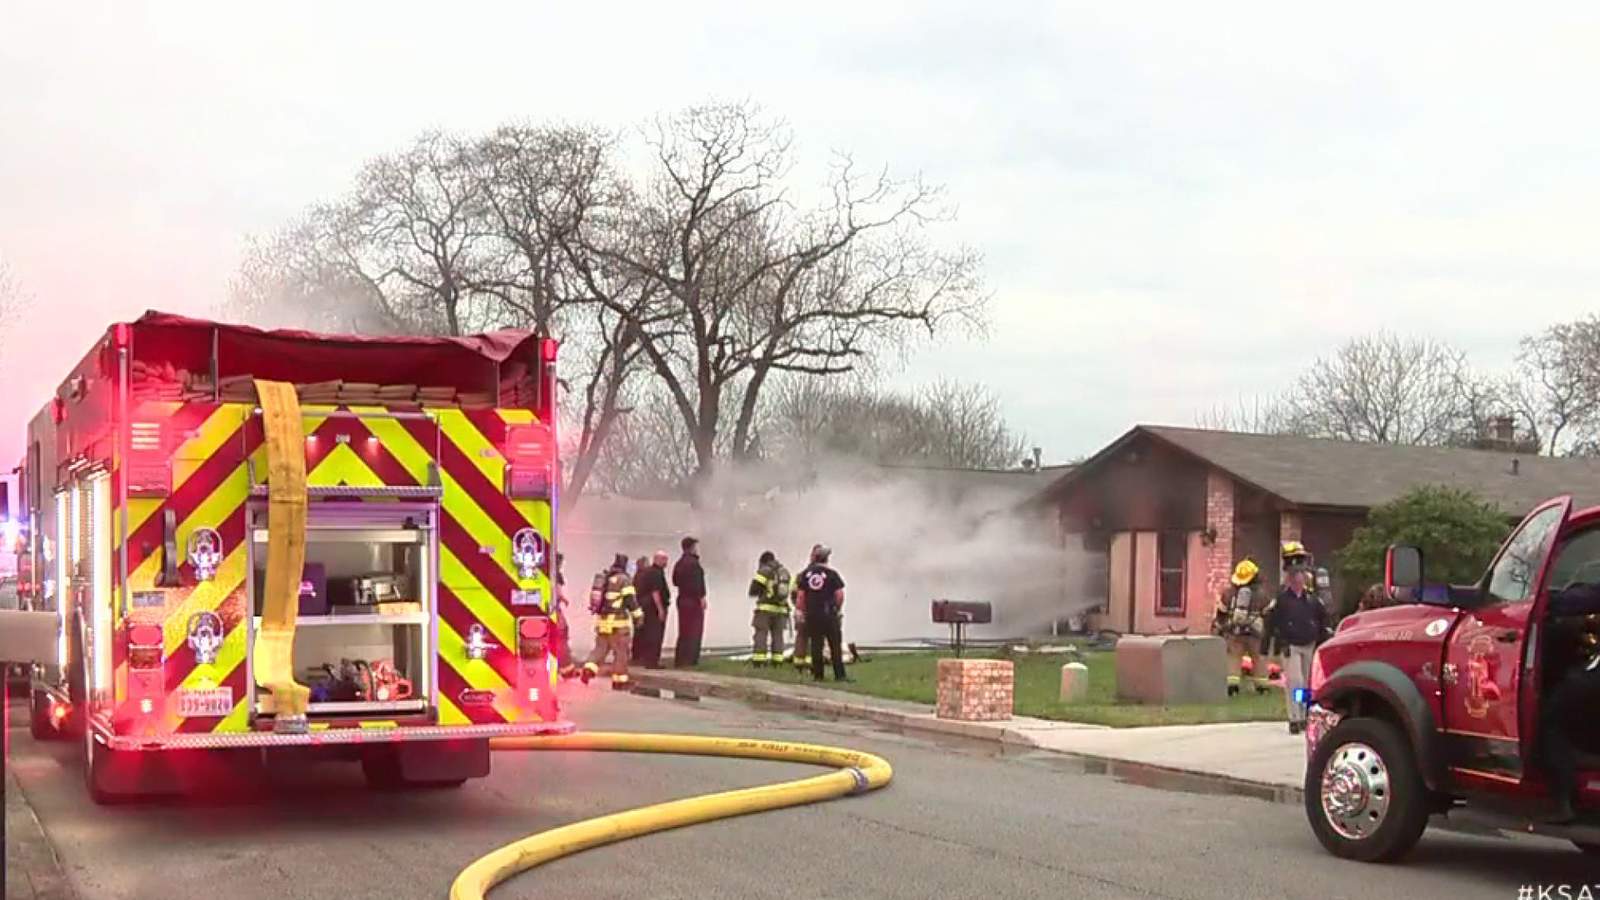 4-month-old baby among 10 people who escaped Kirby house fire